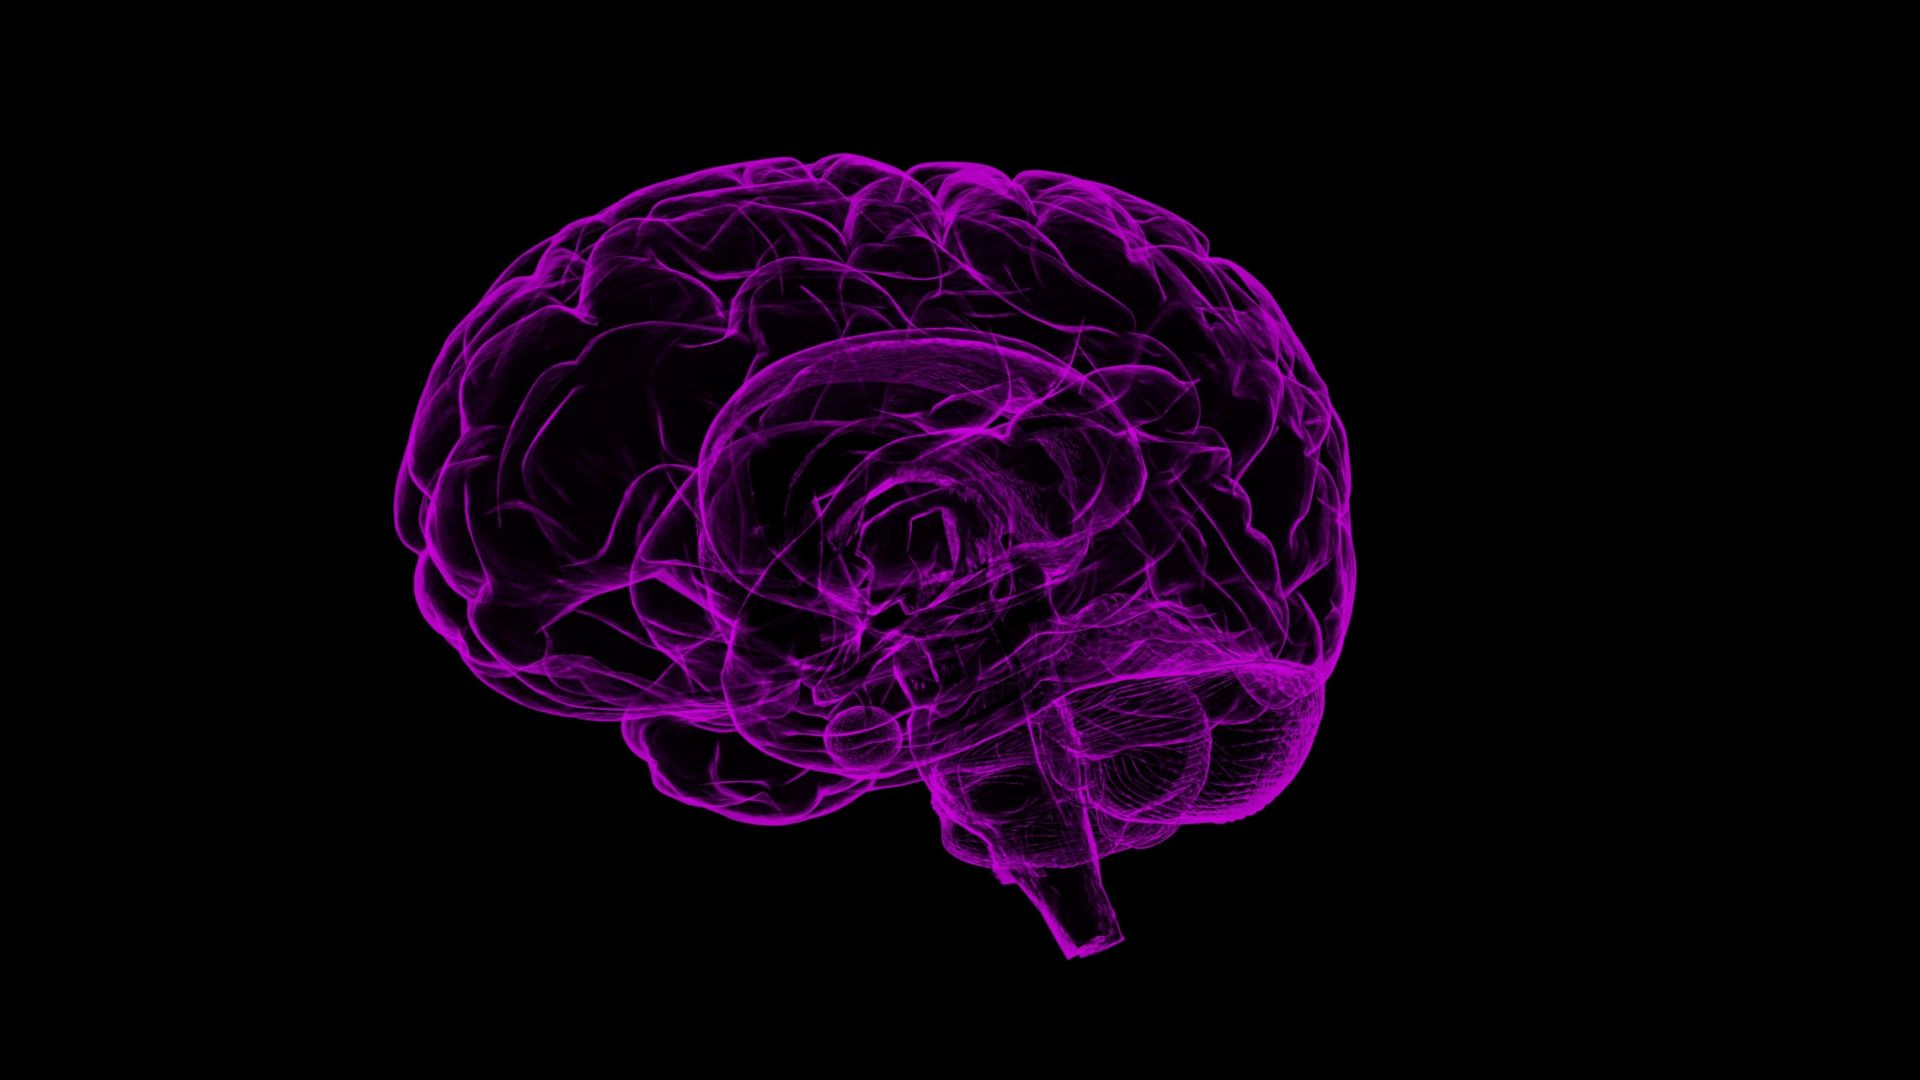 Image of a purple brain on a black background